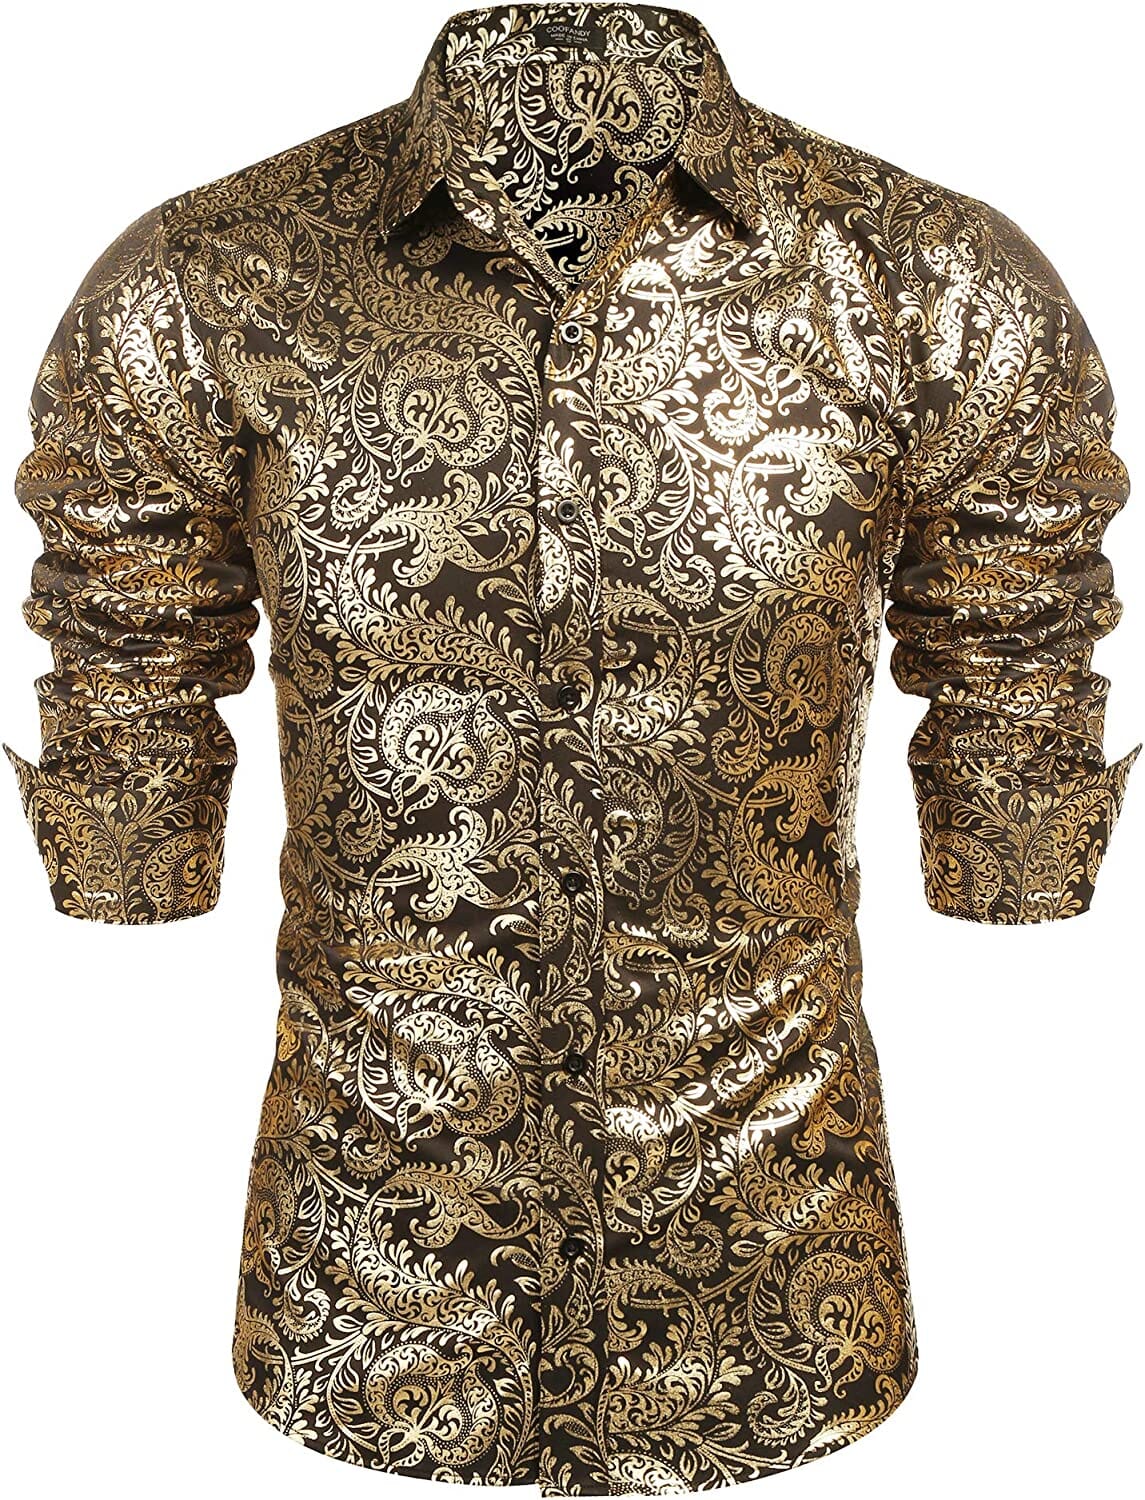 Luxury Design Floral Dress Shirt (US Only) Shirts COOFANDY Store Gold S 